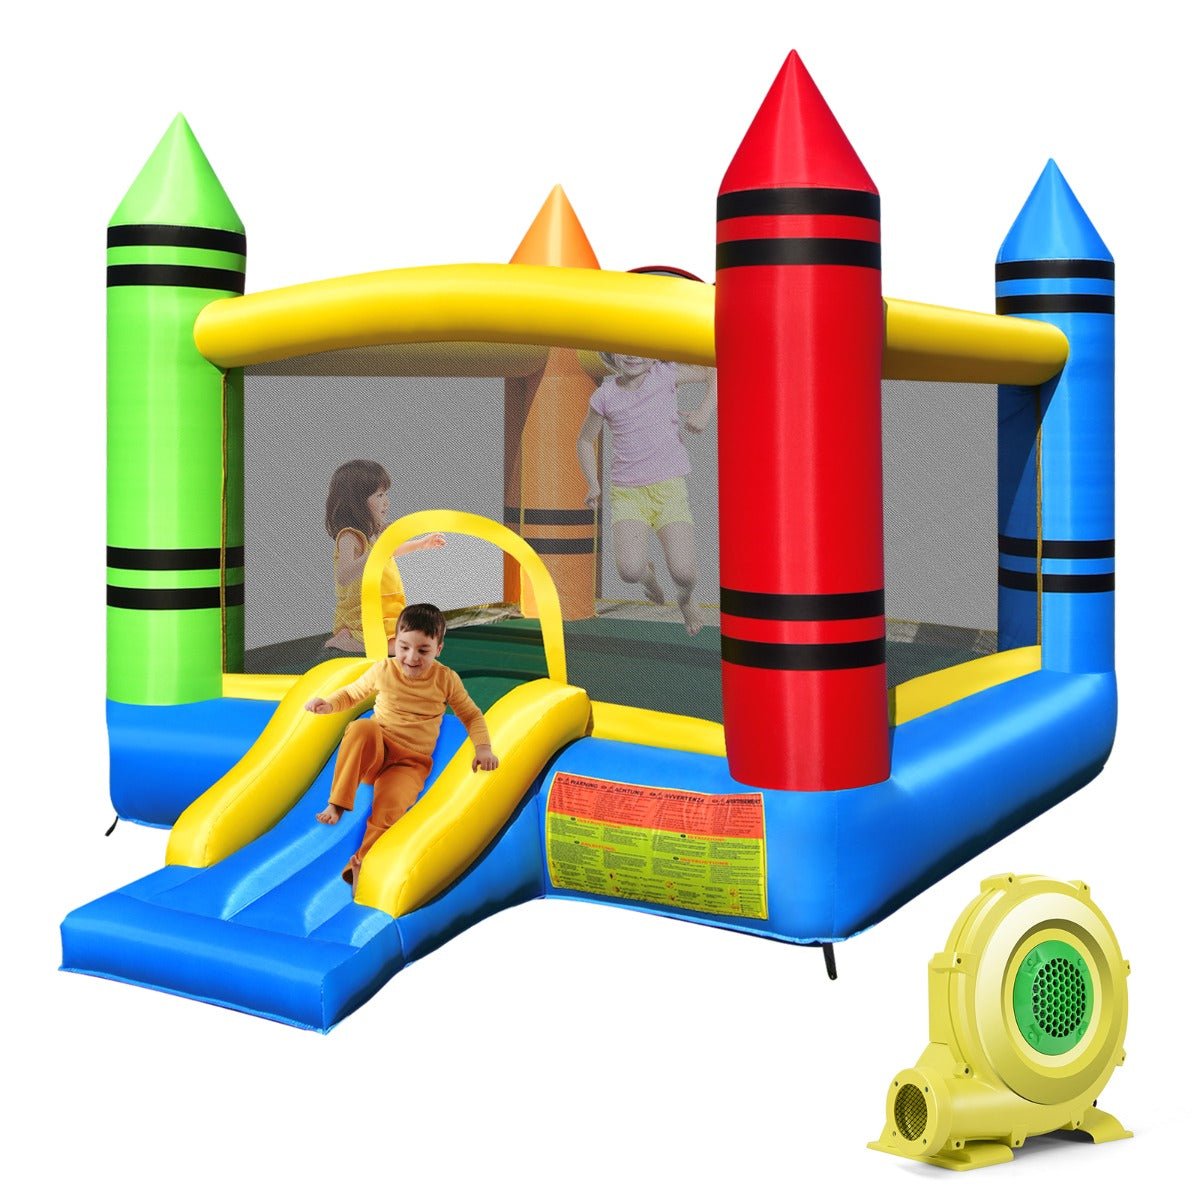 Kids Jumping Castle Bouncer - Bounce, Slide, and Play in the Outdoors